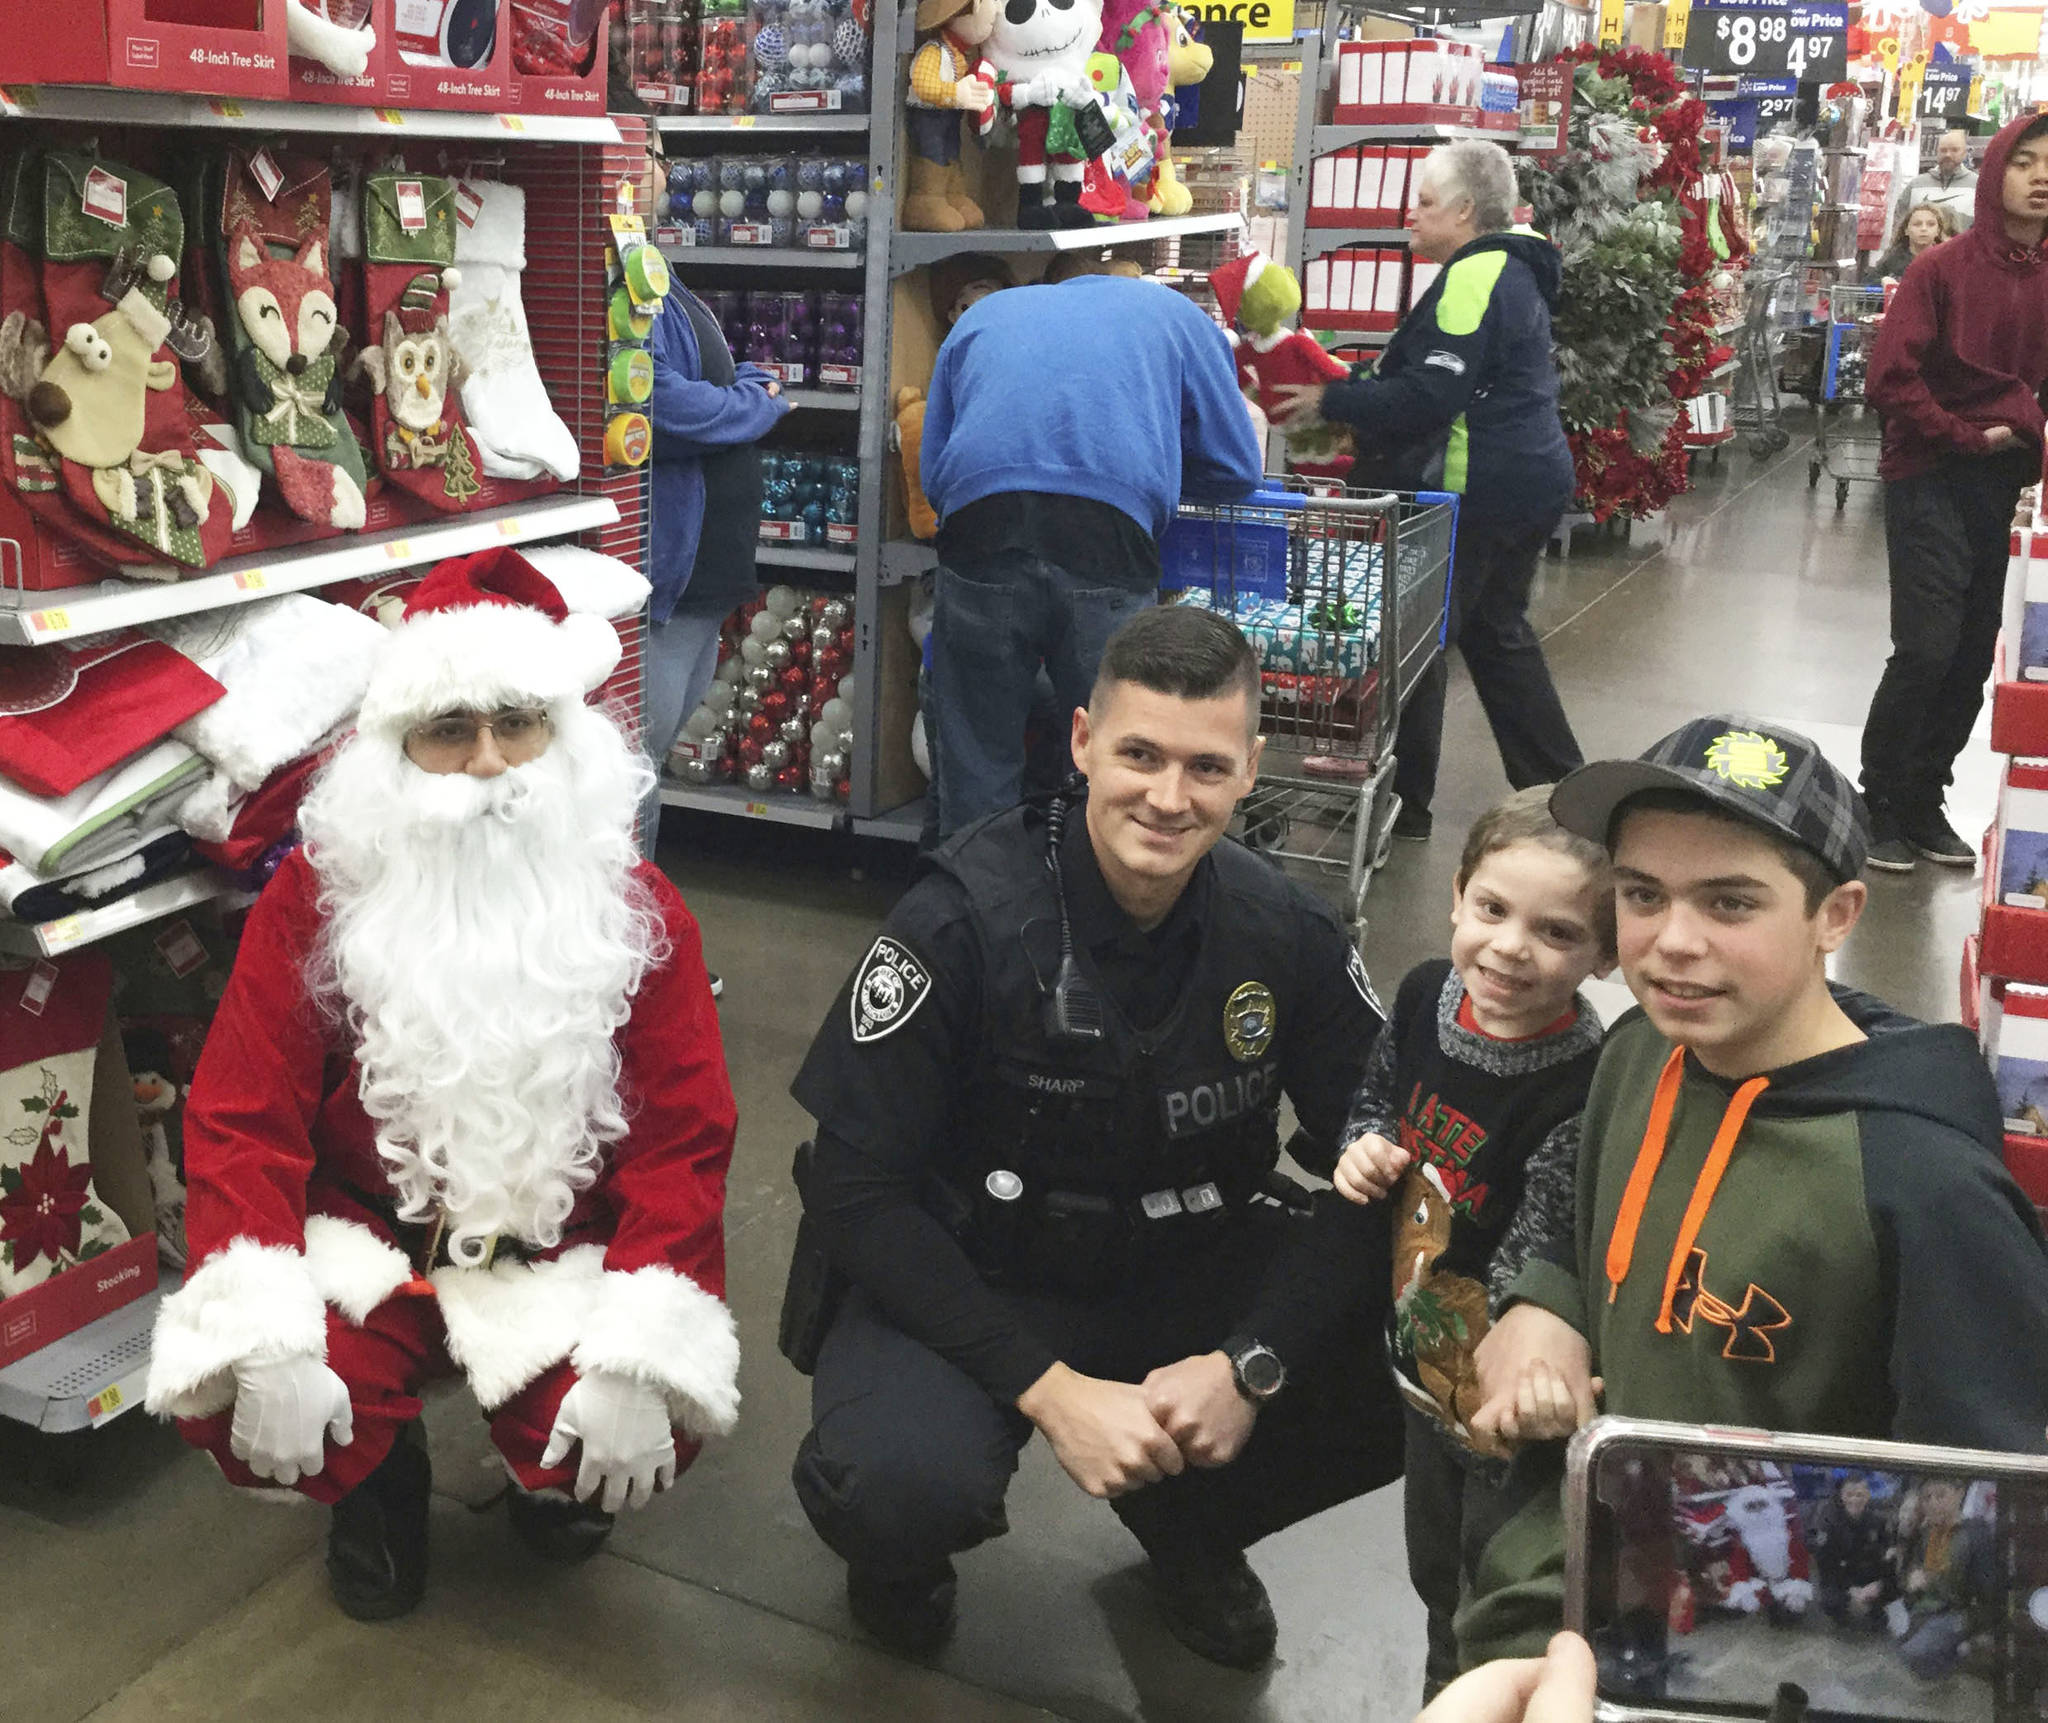 Cops team up to holiday shop with kids